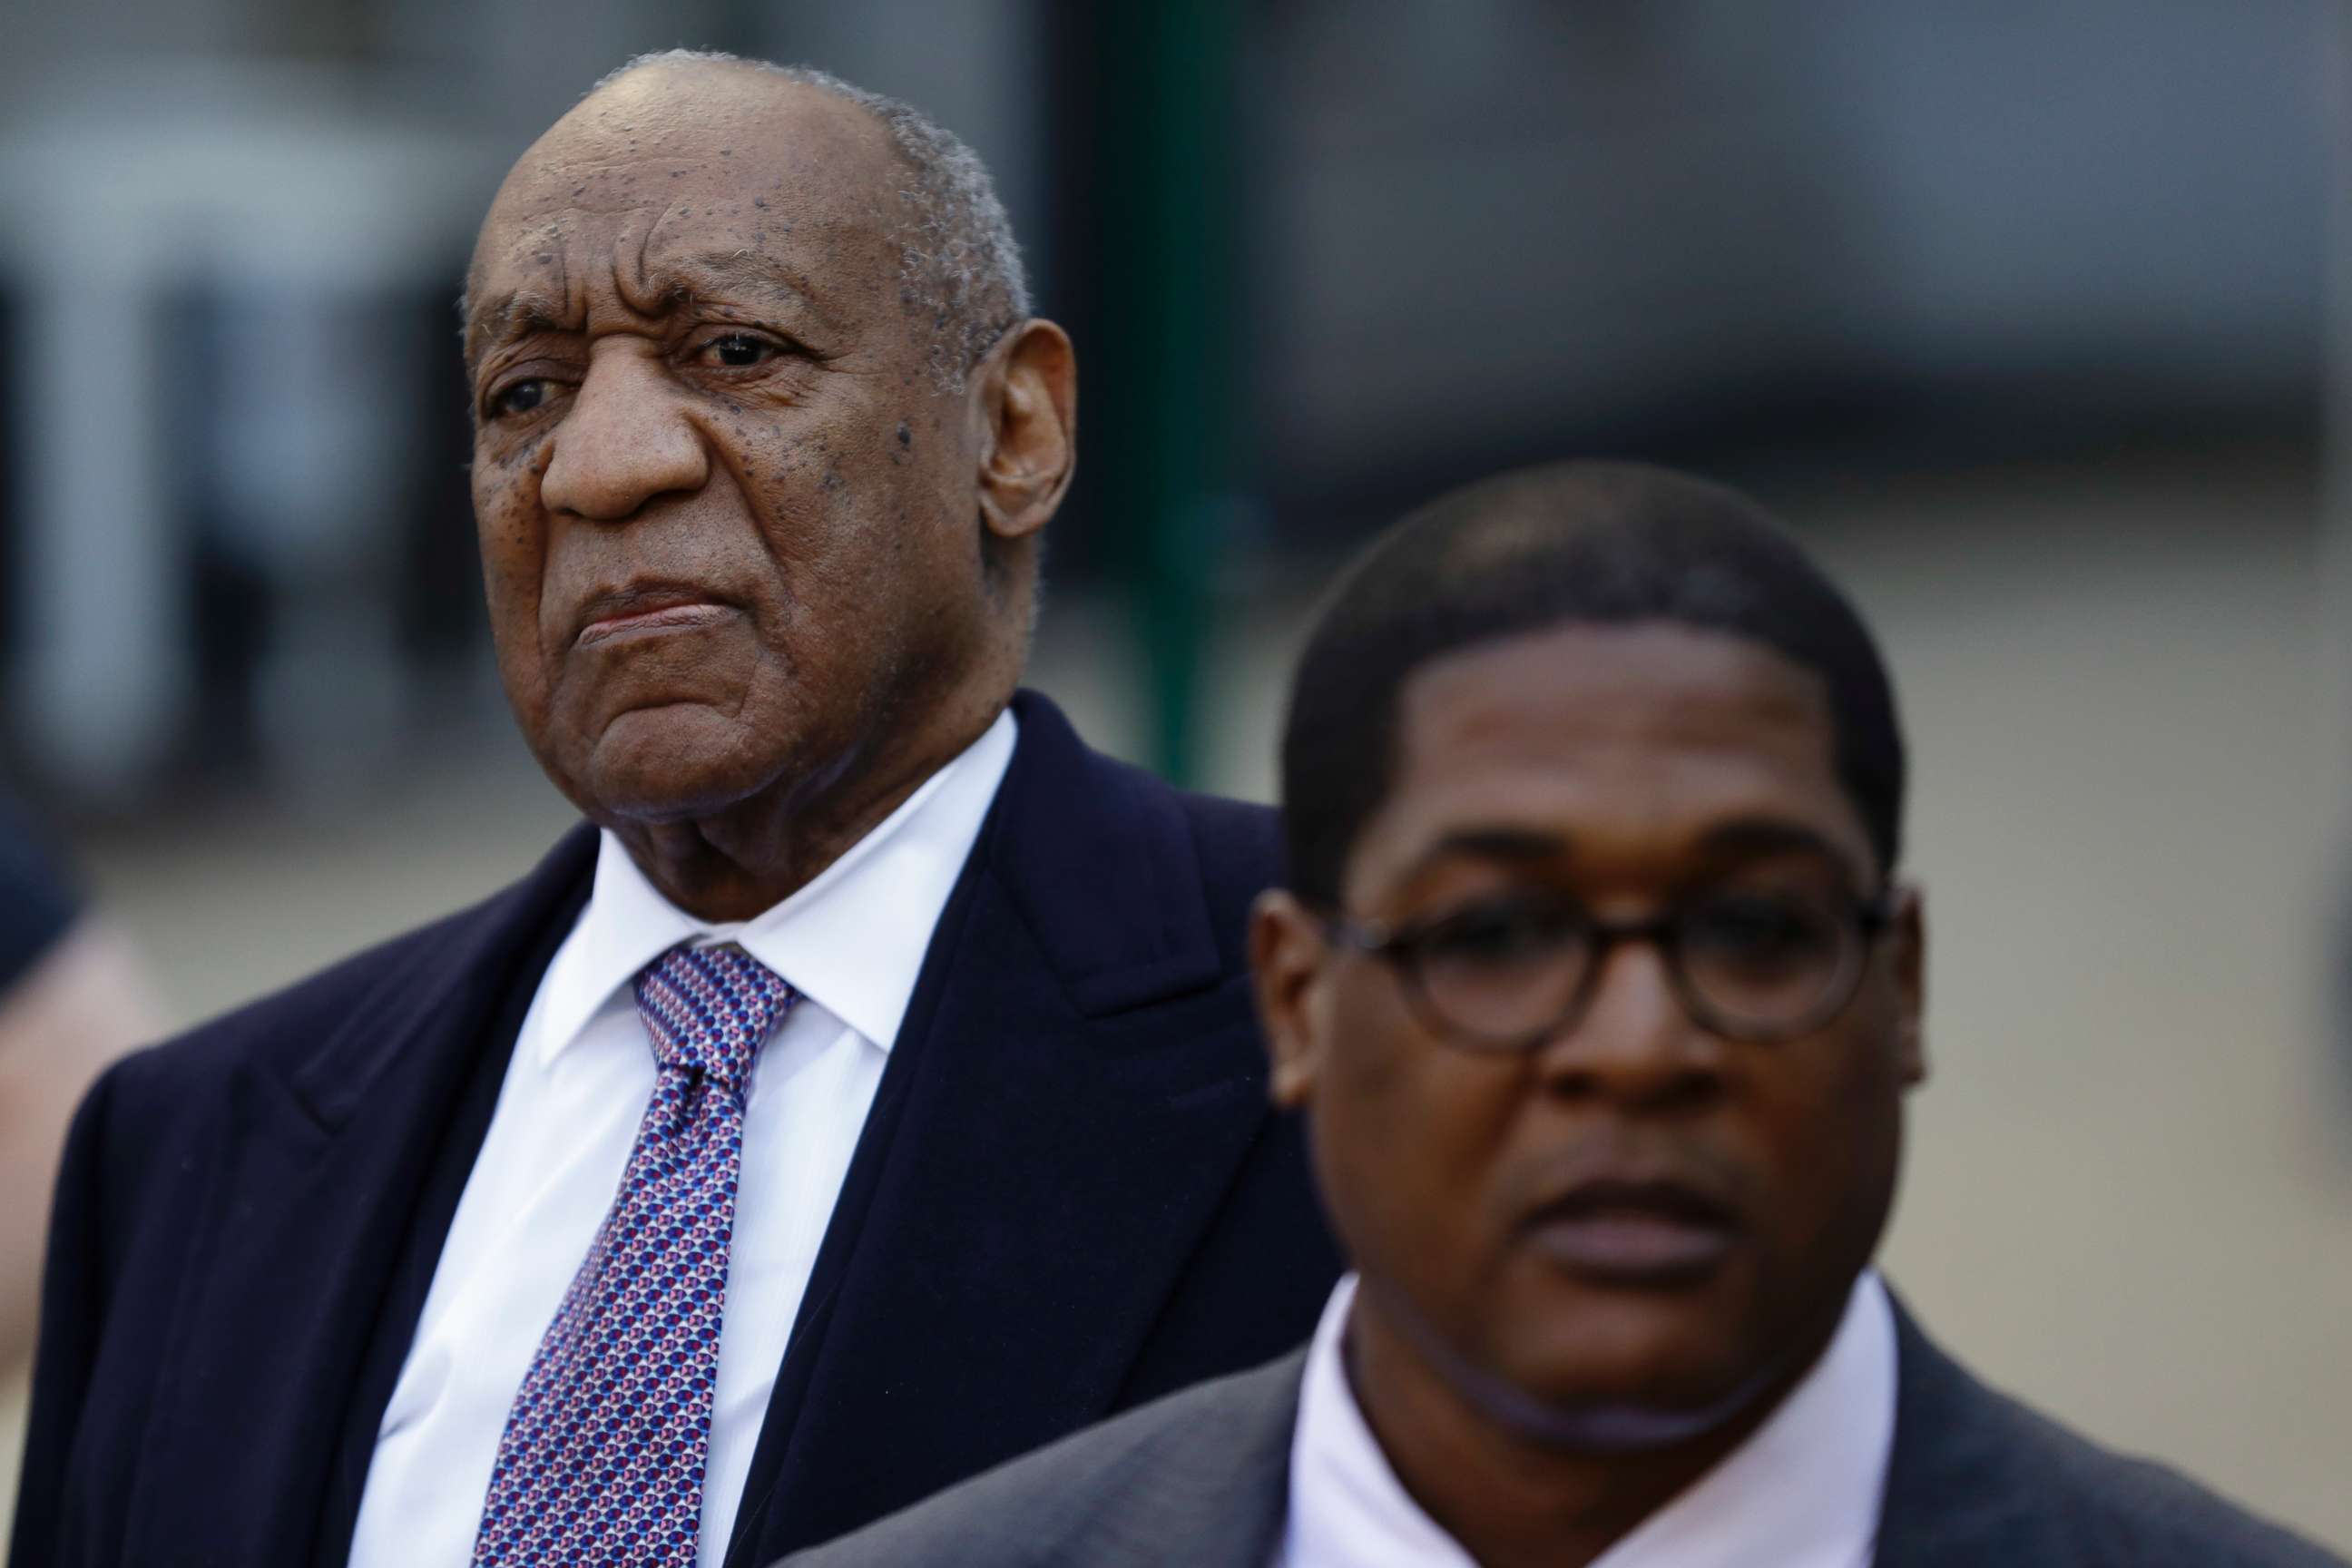 PHOTO: Bill Cosby departs after his sexual assault trial, April 18, 2018, at the Montgomery County Courthouse in Norristown, Pa.